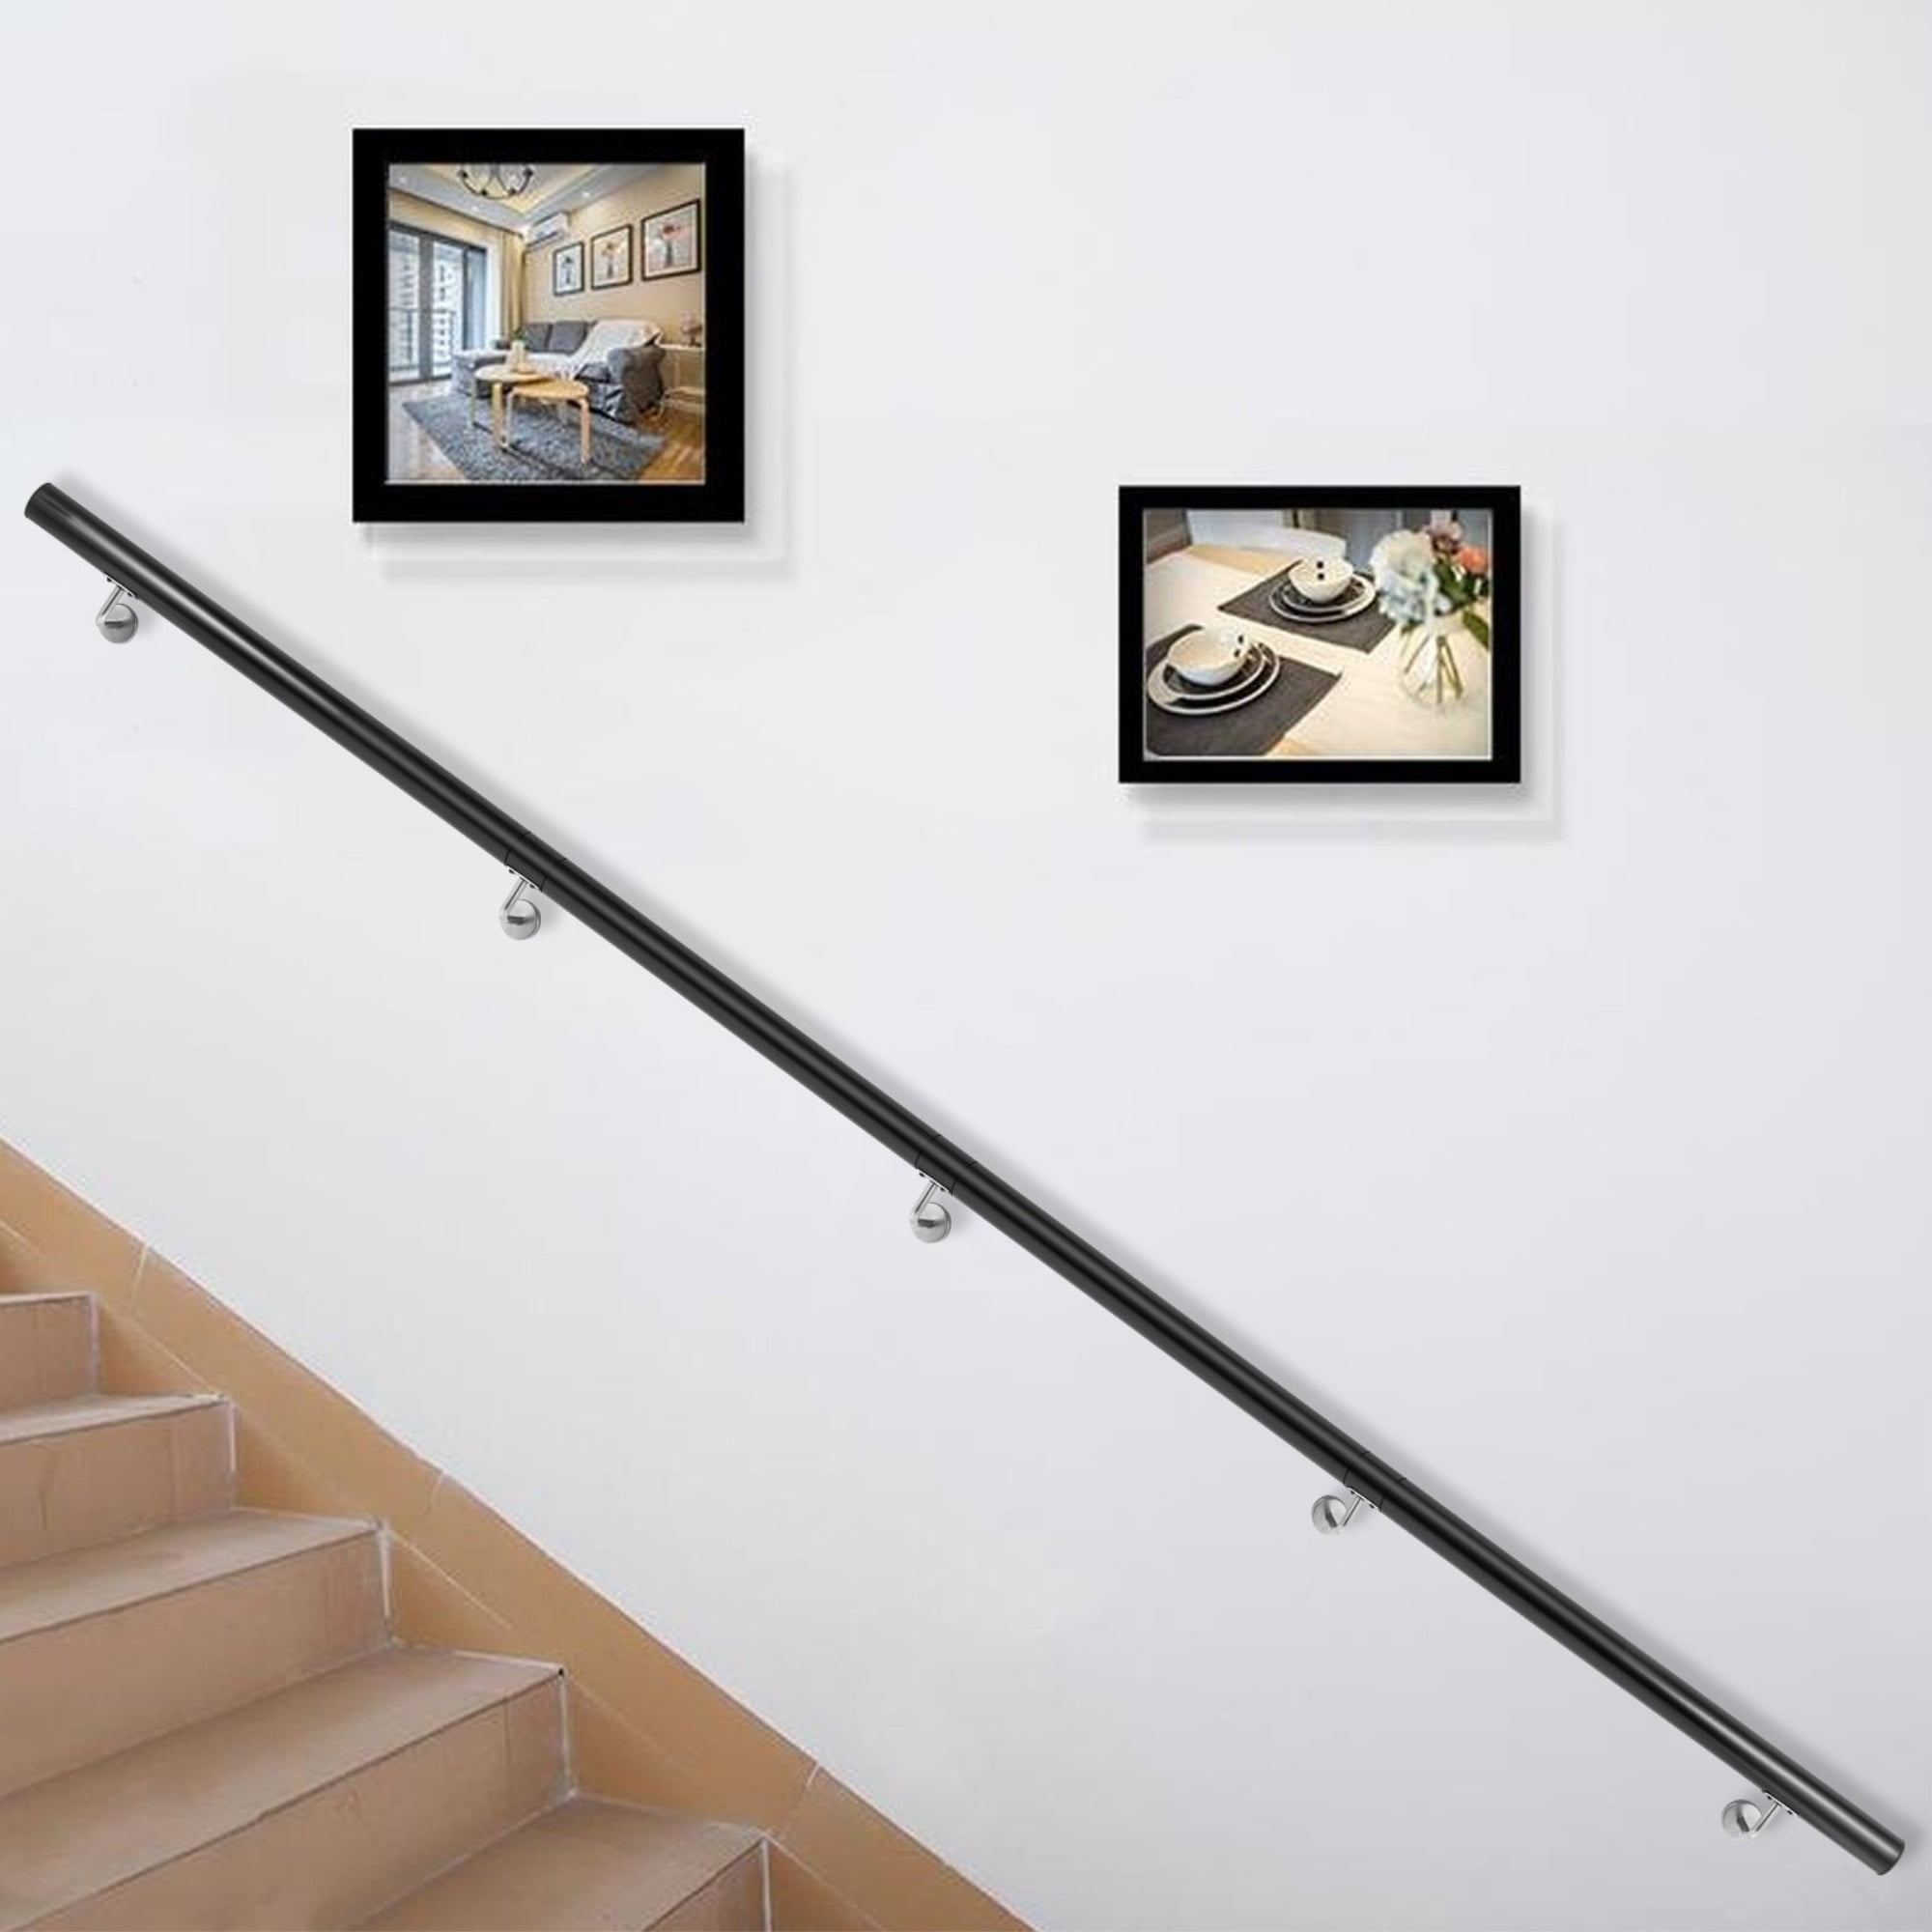 Monzana Stainless Steel Entrance Railing 120 cm Indoor Outdoor Mounting Handrail Wall Handrail Stair Railing